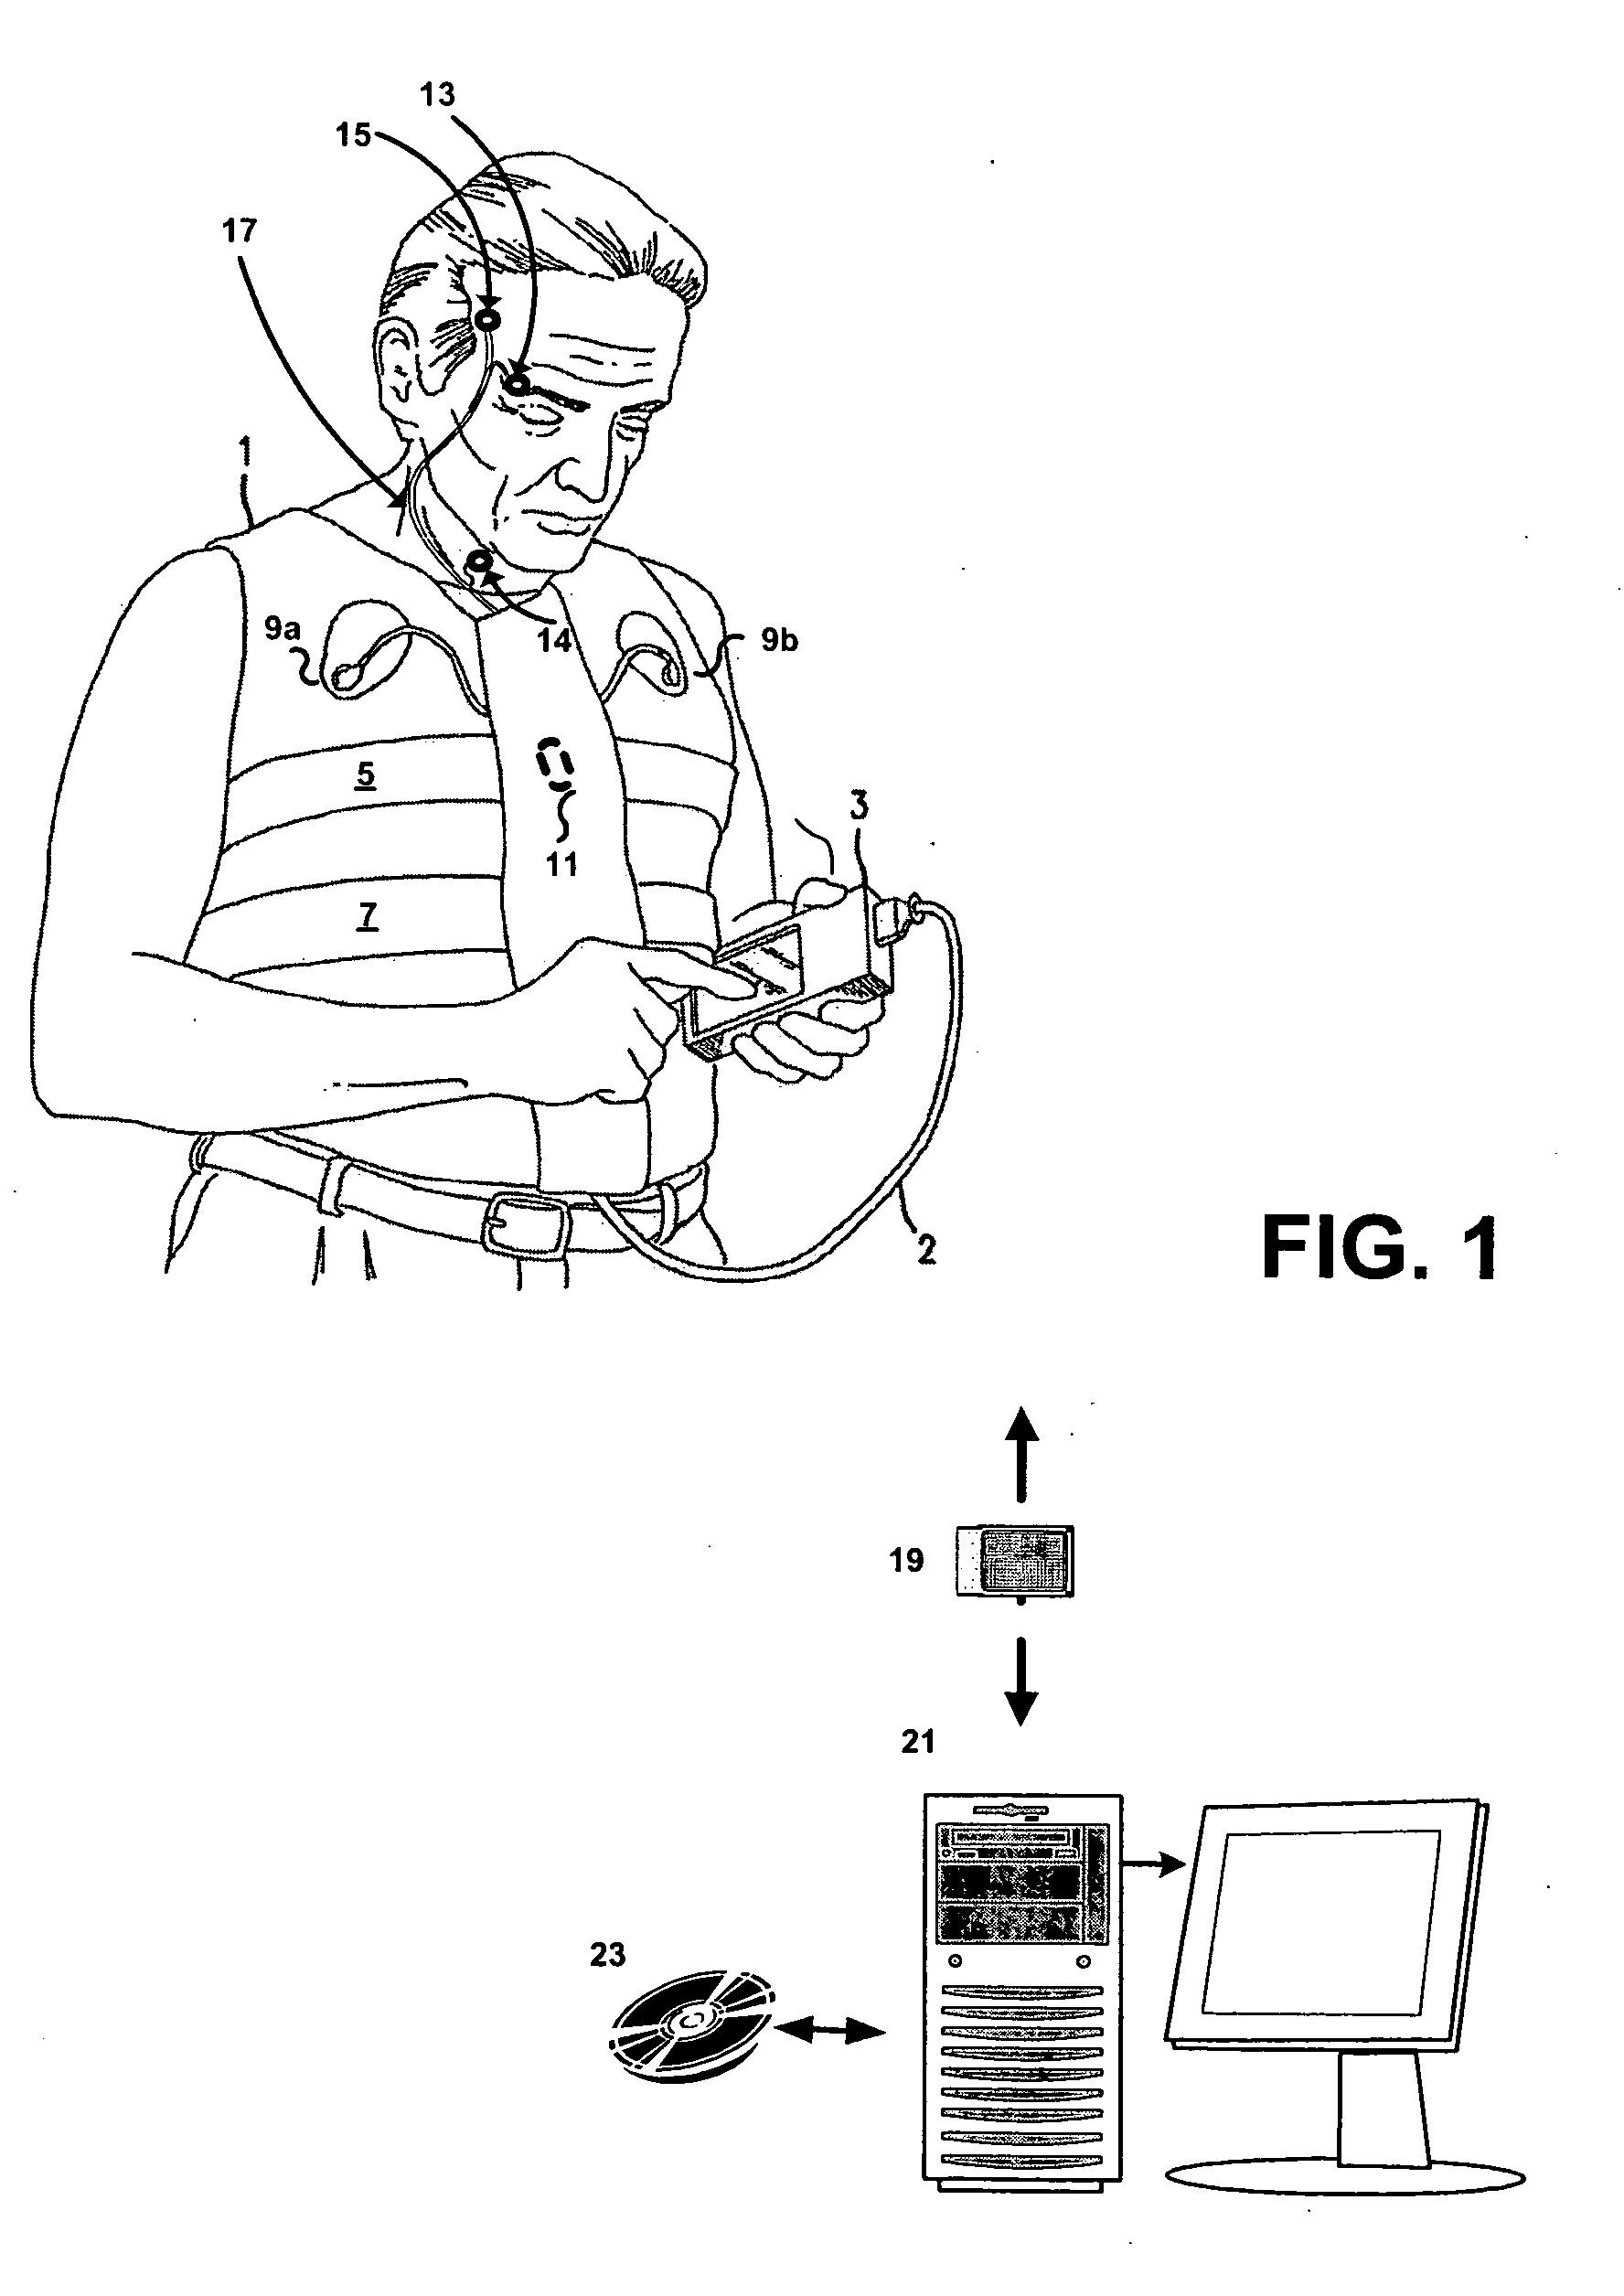 Systems and methods for monitoring cough